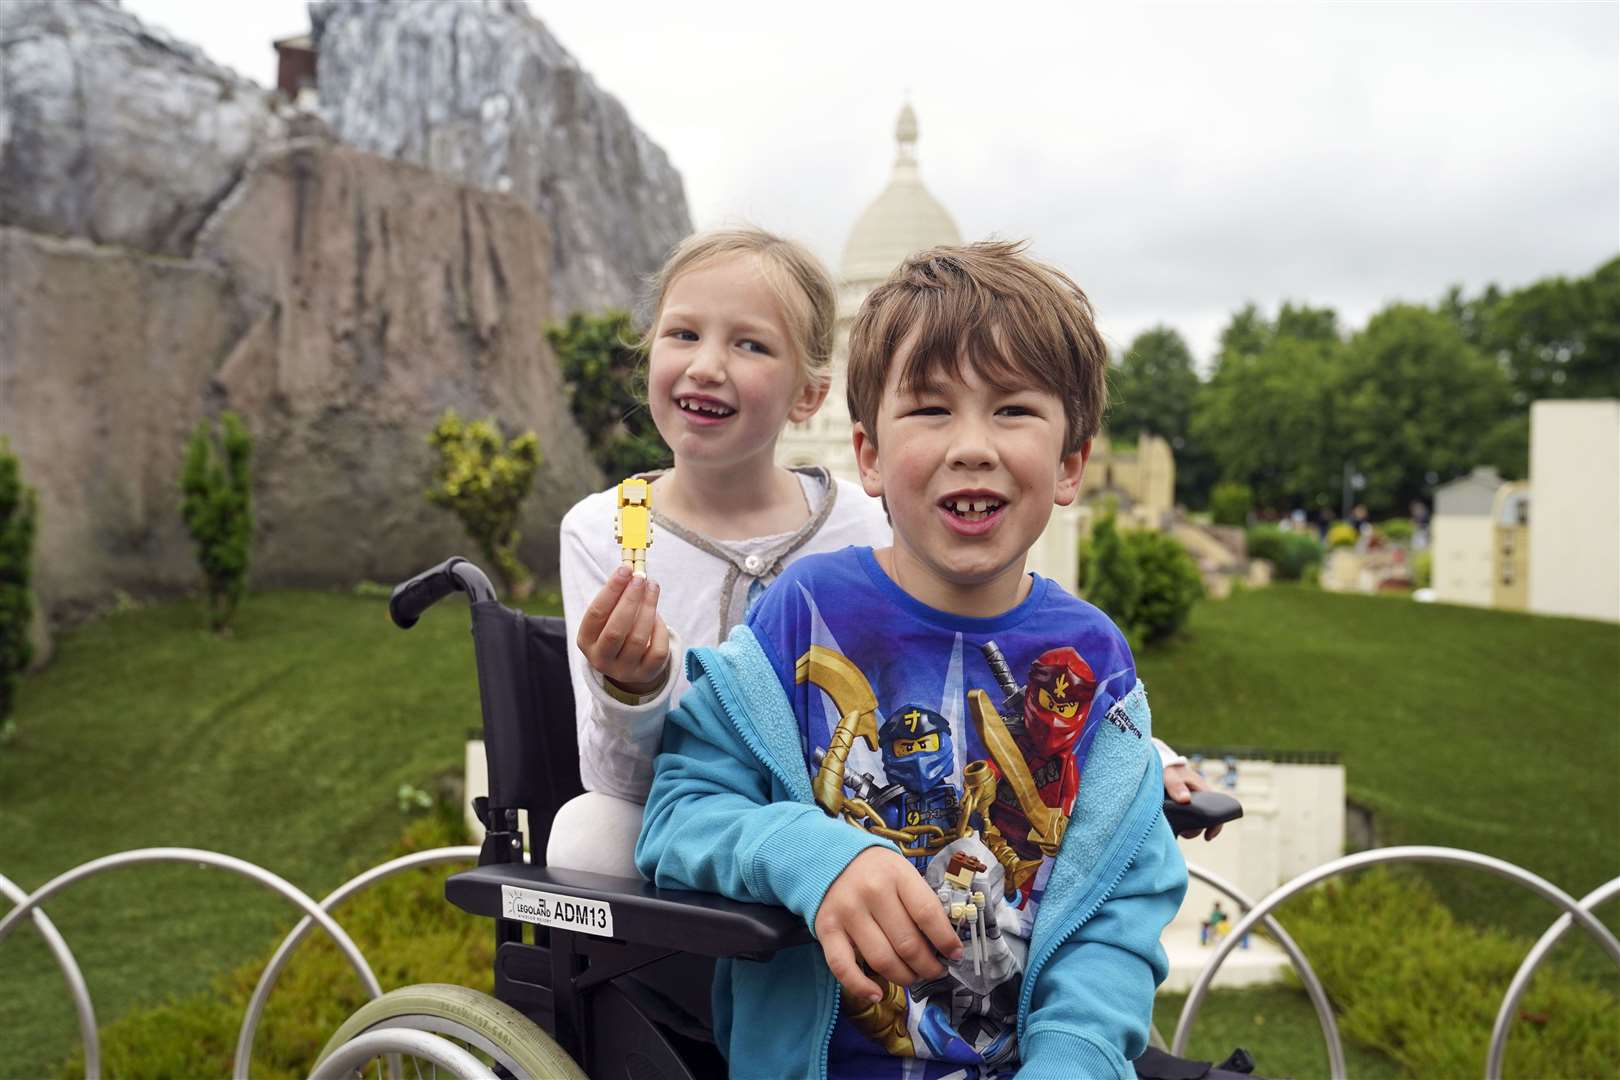 Sebby Brett with his sister Lottie during a visit to Legoland (PA)